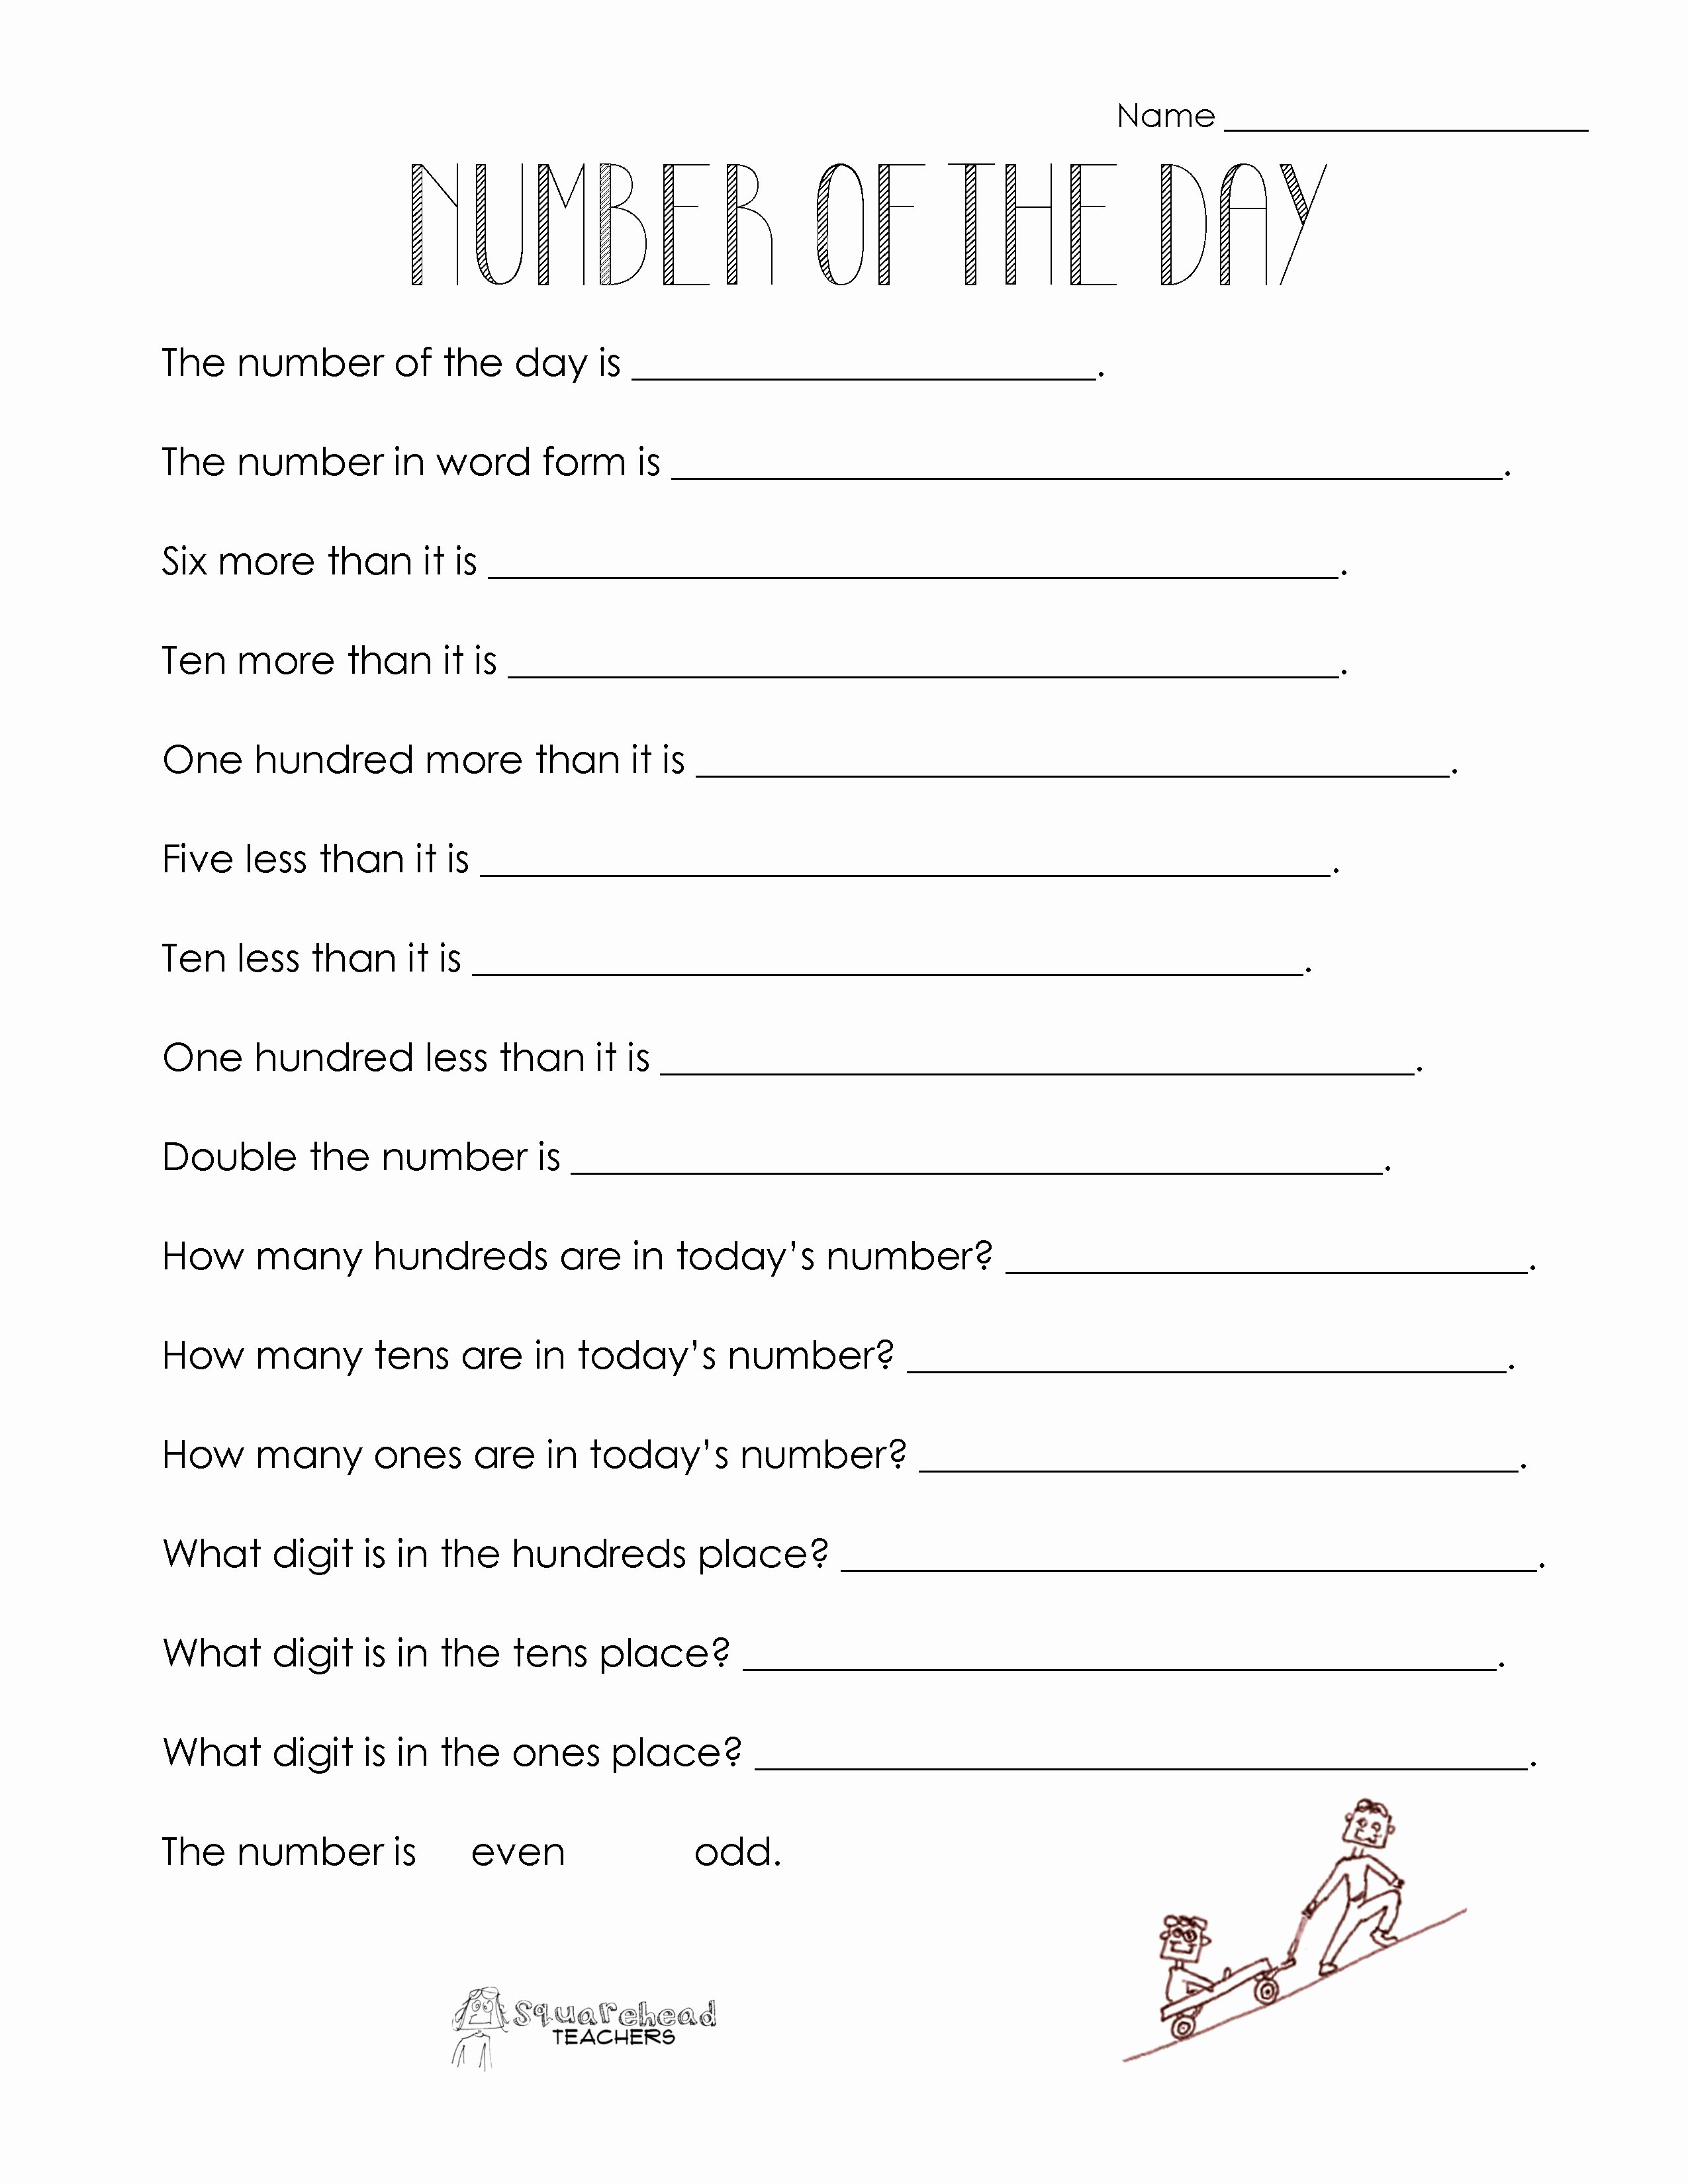 Number Of the Day Worksheet Lovely Number Of the Day Worksheet Collection